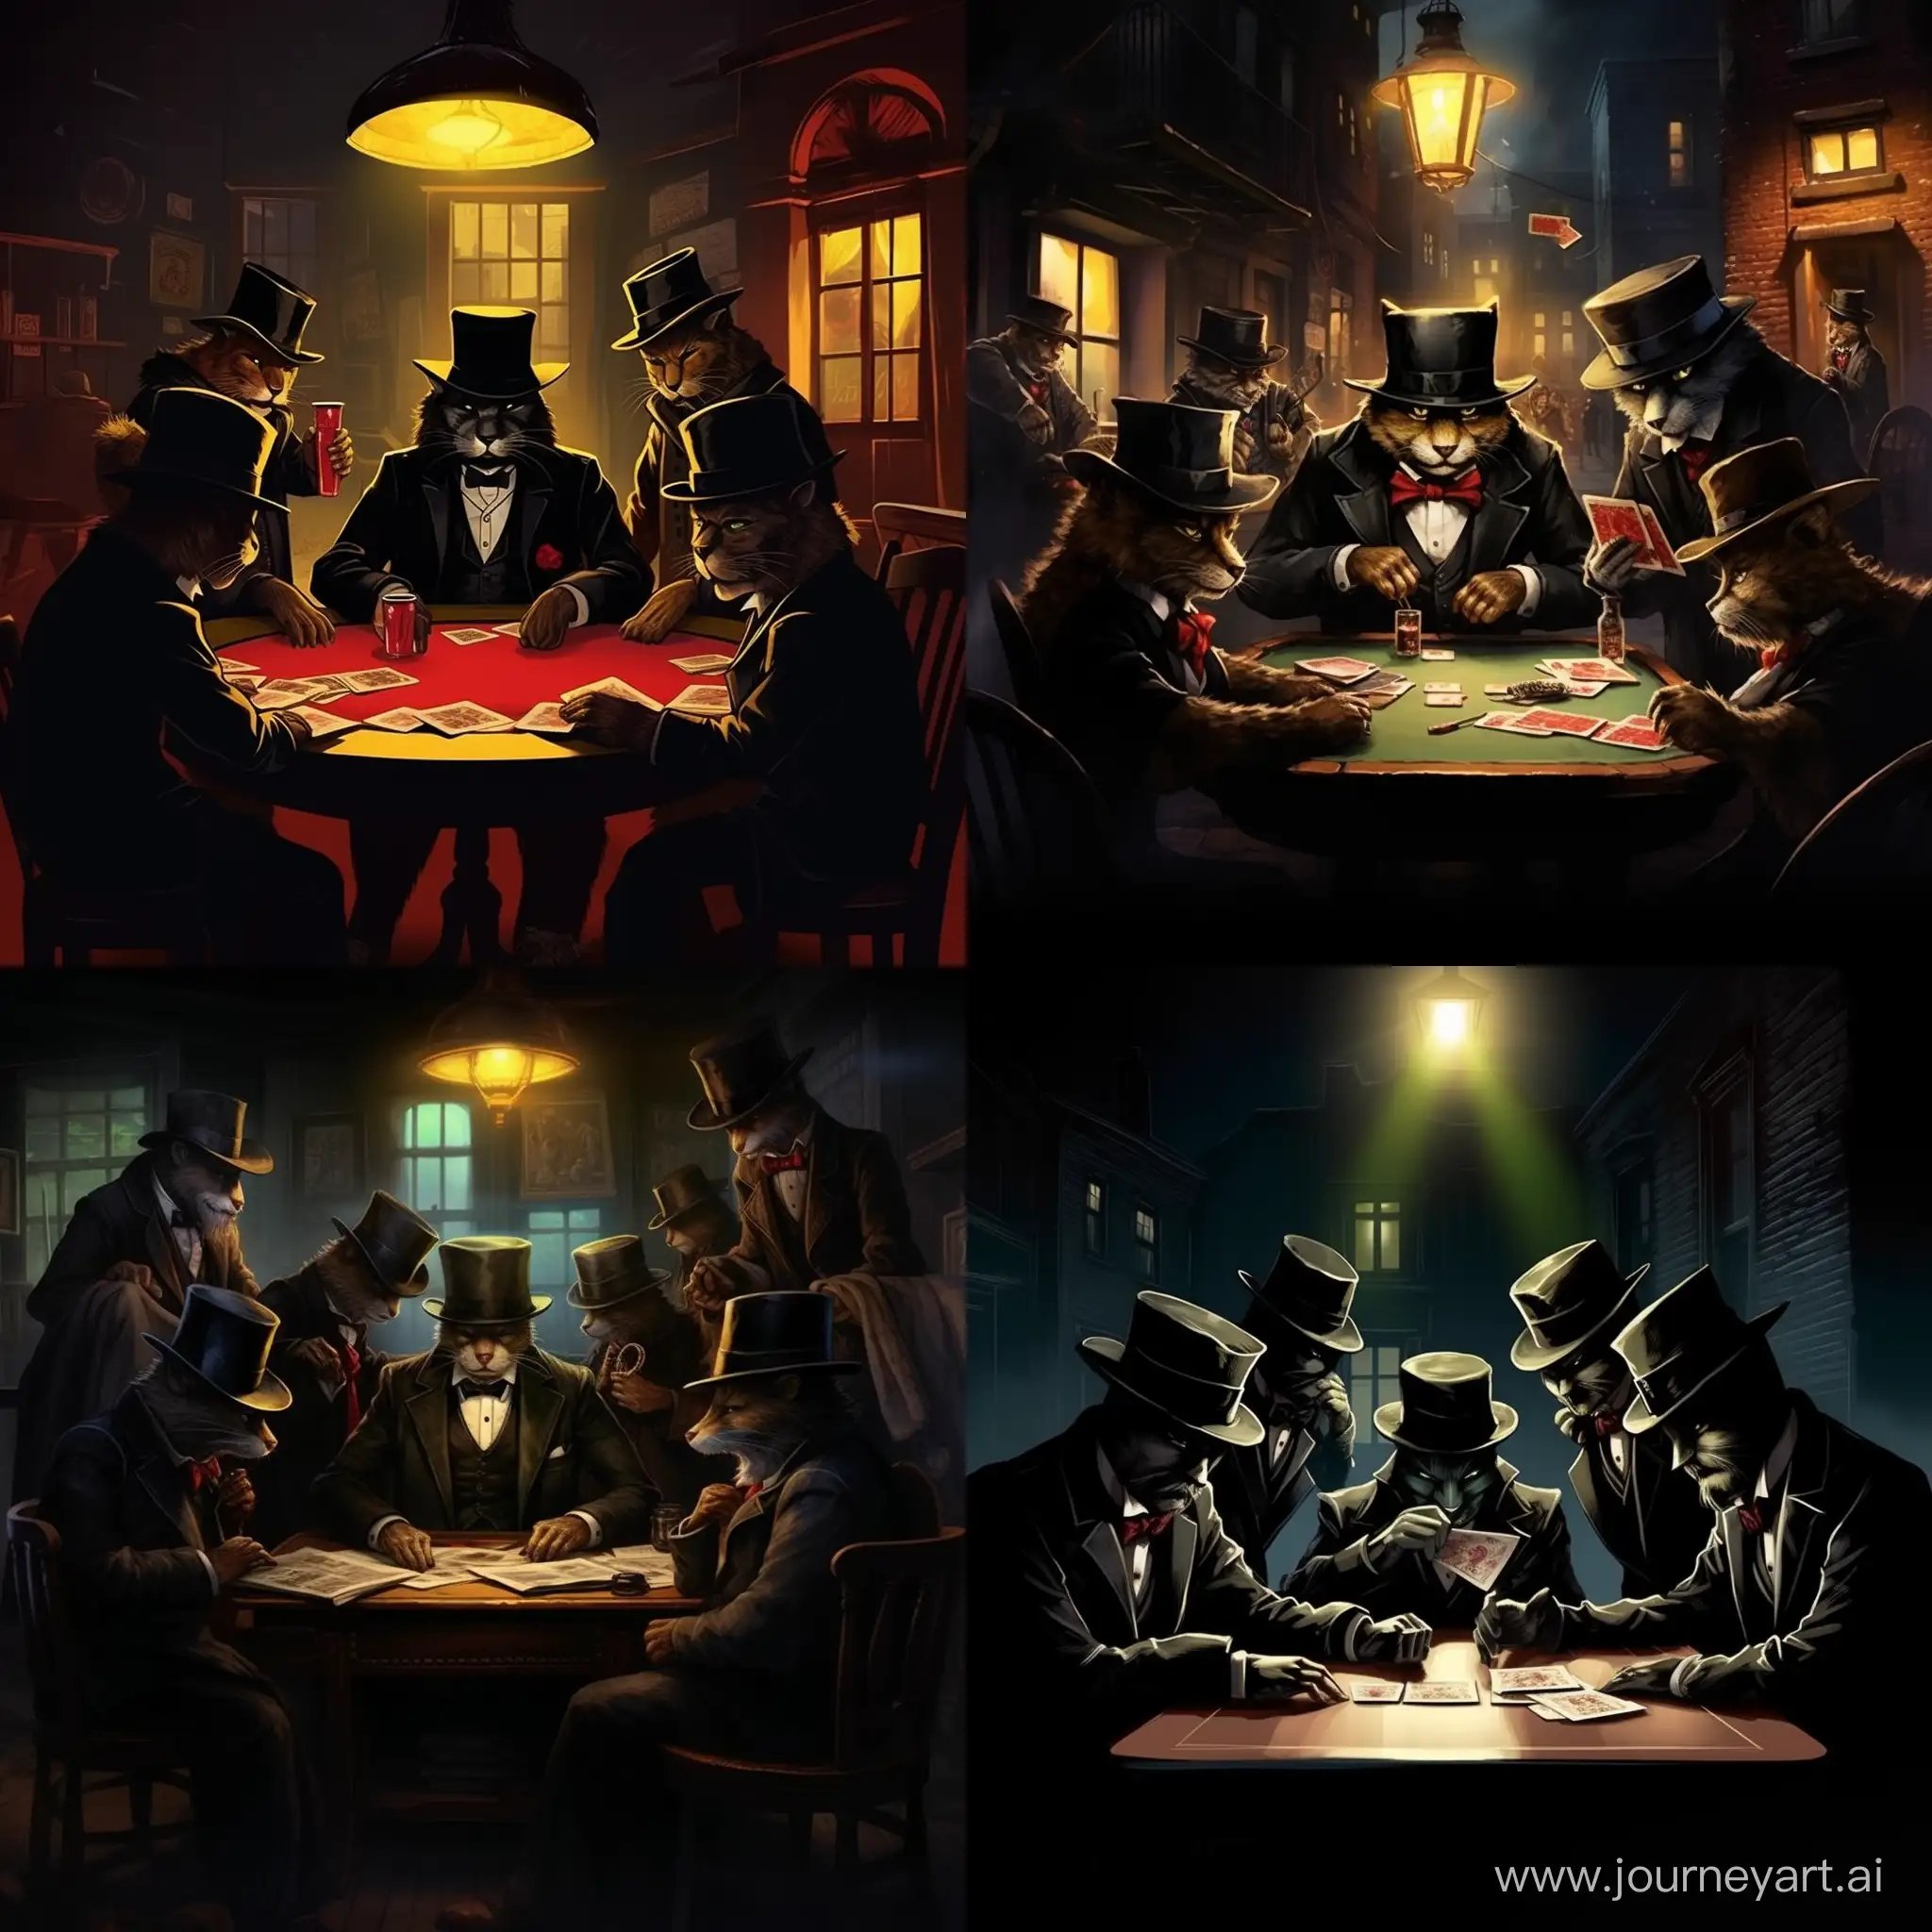 Picture a dimly lit alley where a group of suave-looking cats, wearing tiny fedoras and mysterious glances, gathers around a makeshift card table. The cards are dealt with precision by a cat with a monocle, and others exchange sly looks as they engage in a feline version of the Mafia game, plotting and scheming amidst the shadows of the night.